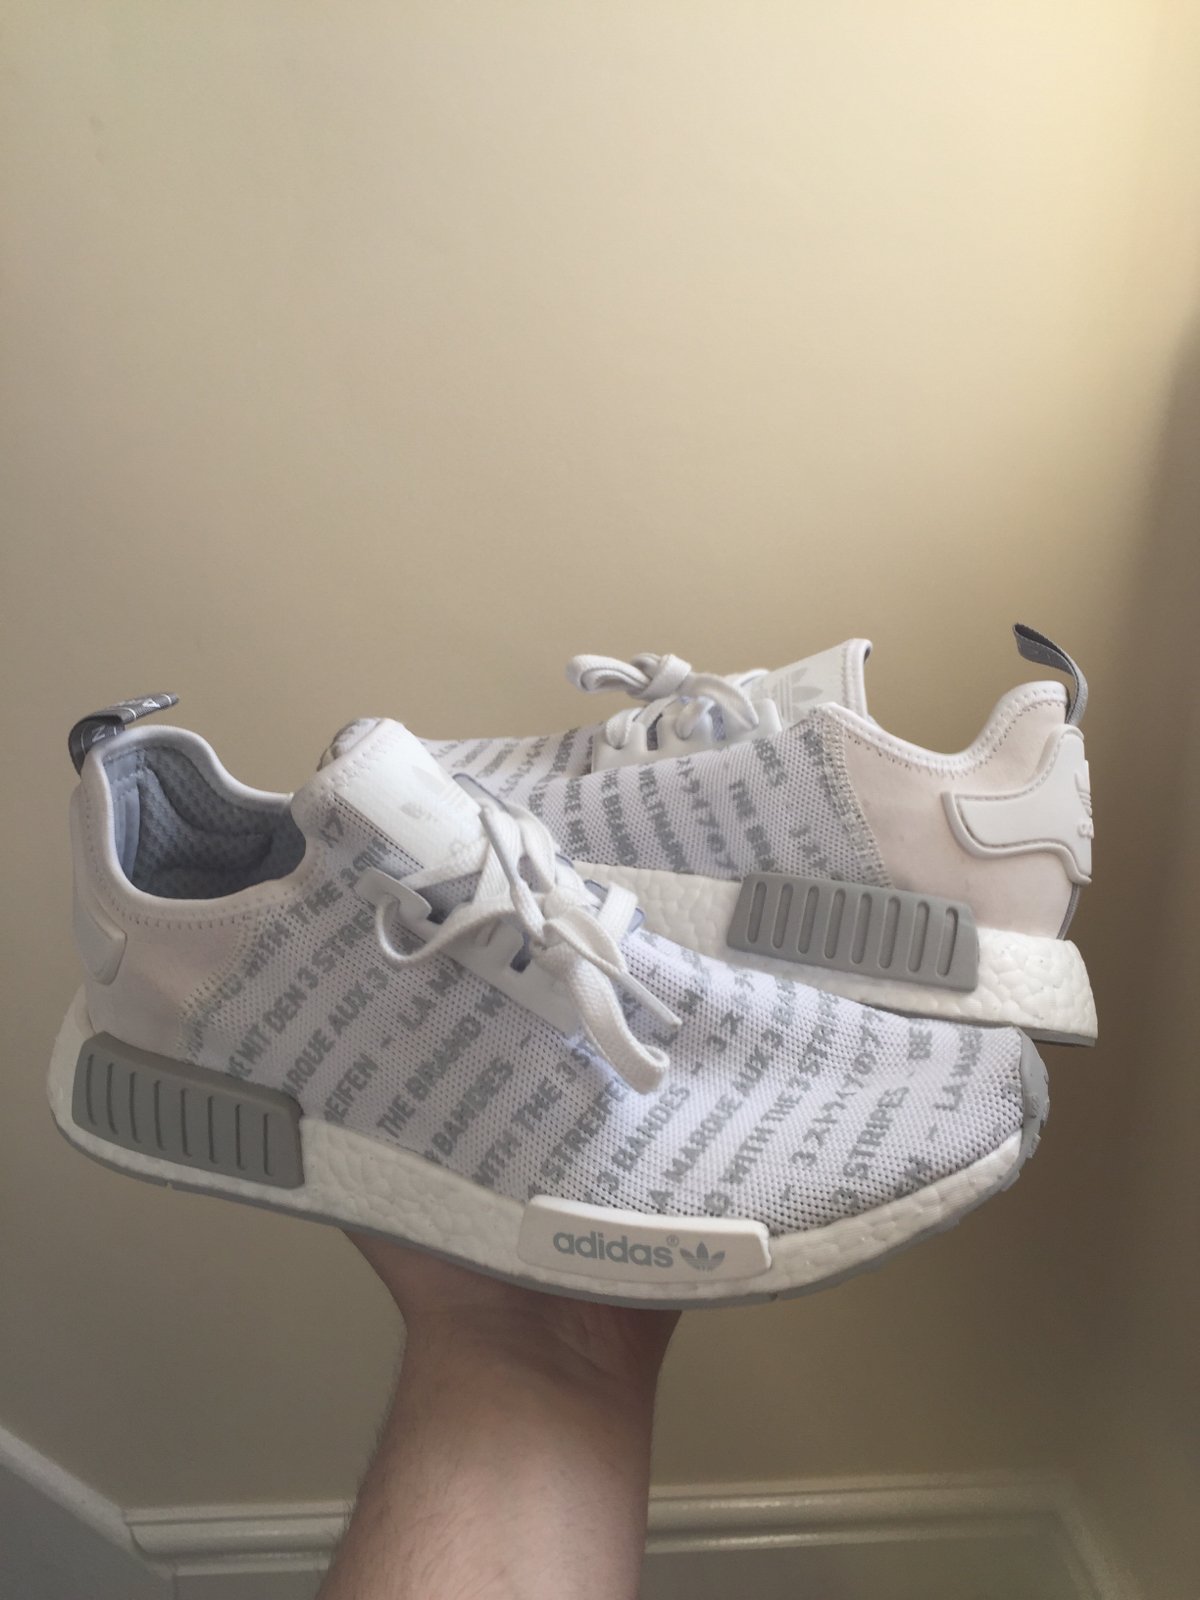 nmd r1 whiteout